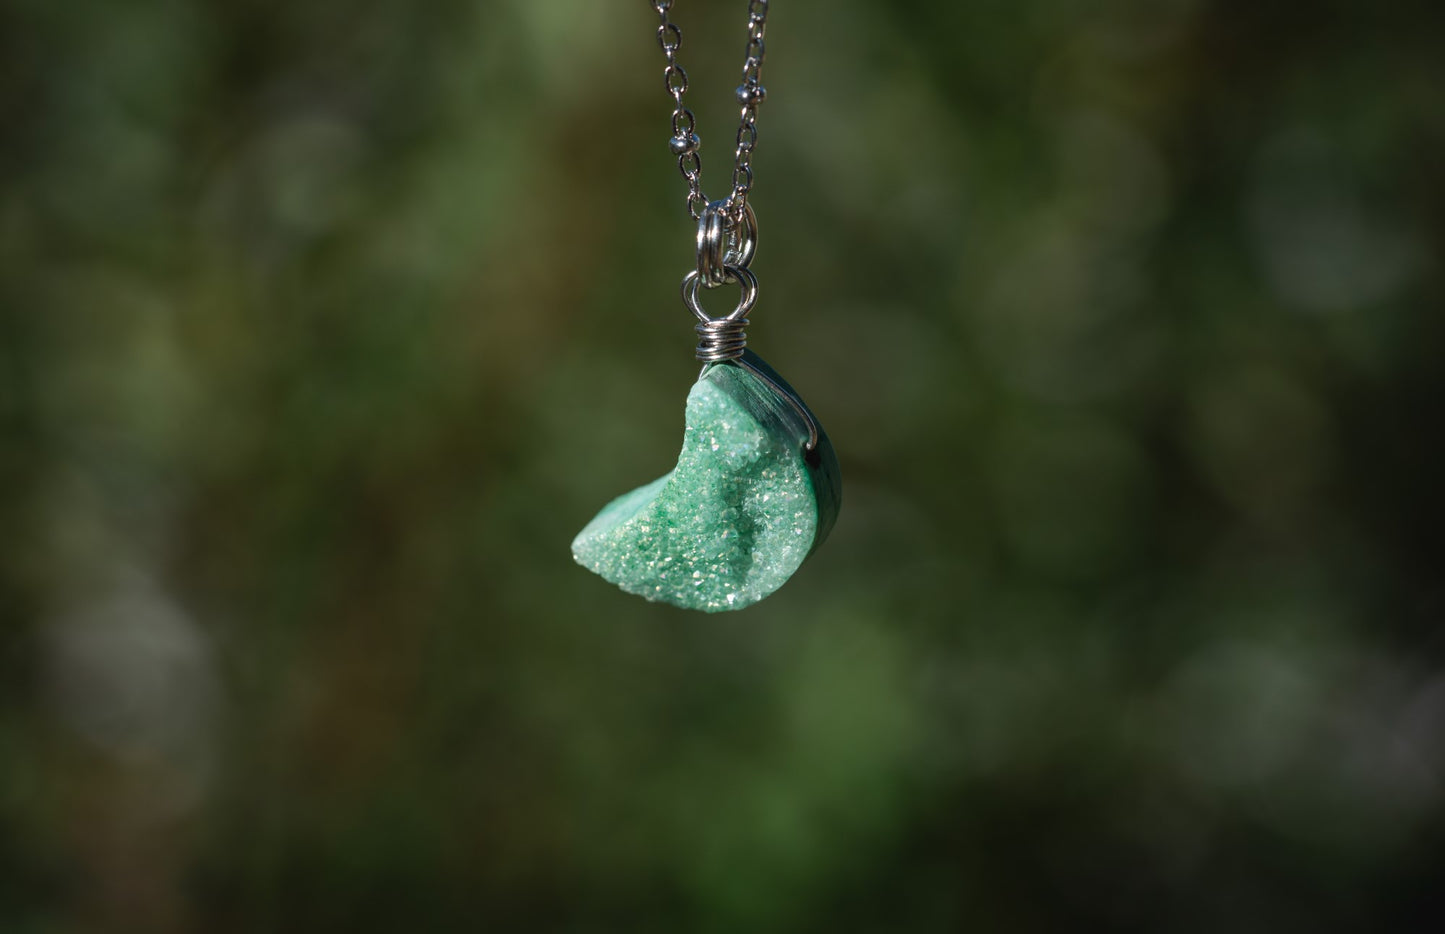 'Stay in Your Happy Place’ Seafoam Green Crescent Moon Titanium Quartz Druzy Stainless Steel Layer Necklace